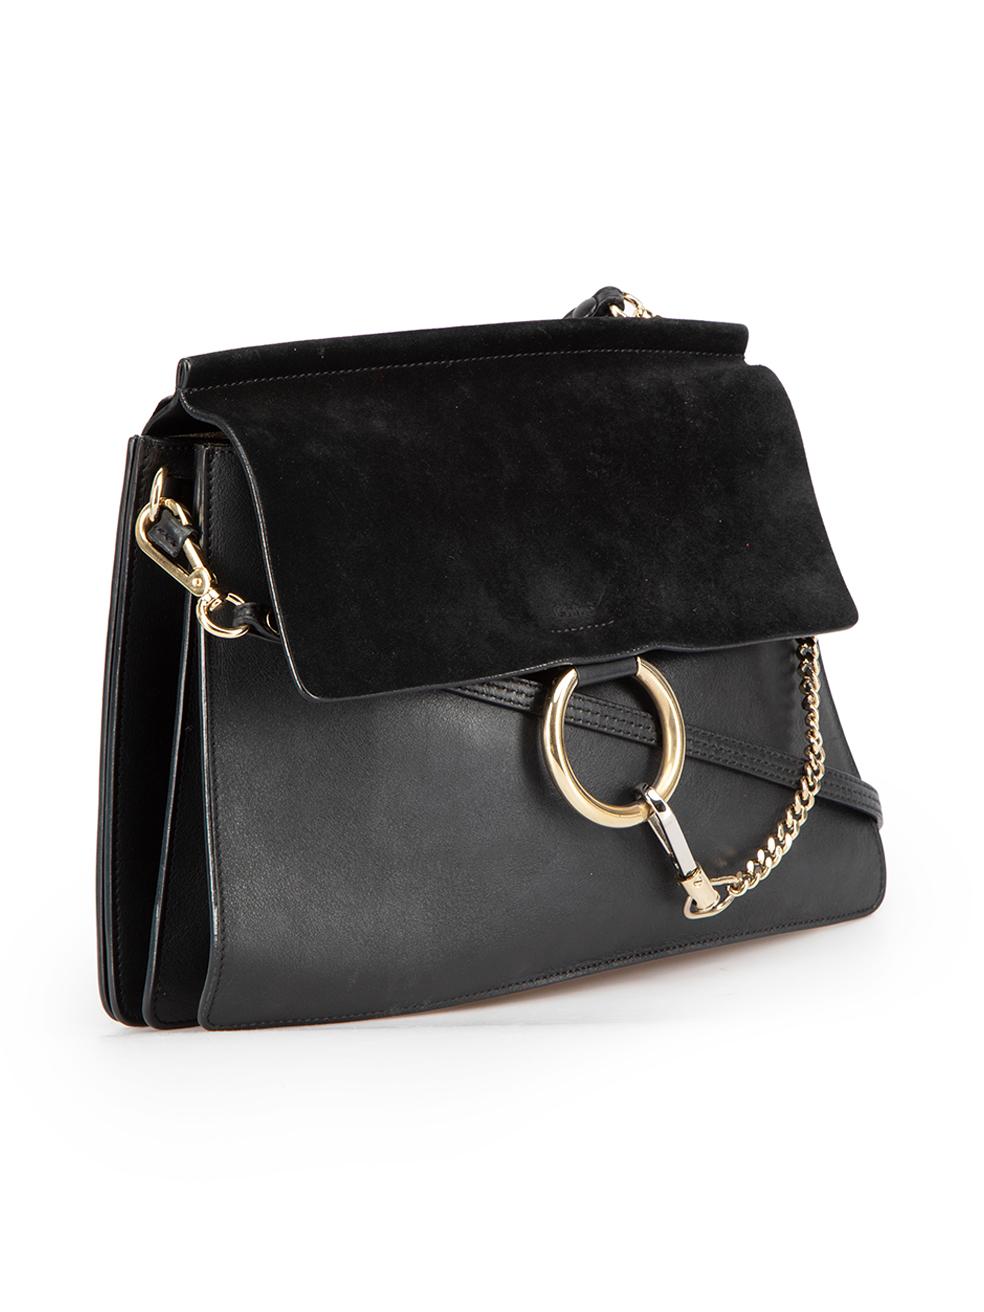 CONDITION is Very good. Minimal wear to bag is evident. Minimal wear to rear and lining with marks to the leather and the top flap with abrasions to the suede on this used Chlo√© designer resale item.
  
Details
Faye
Black
Leather
Medium crossbody